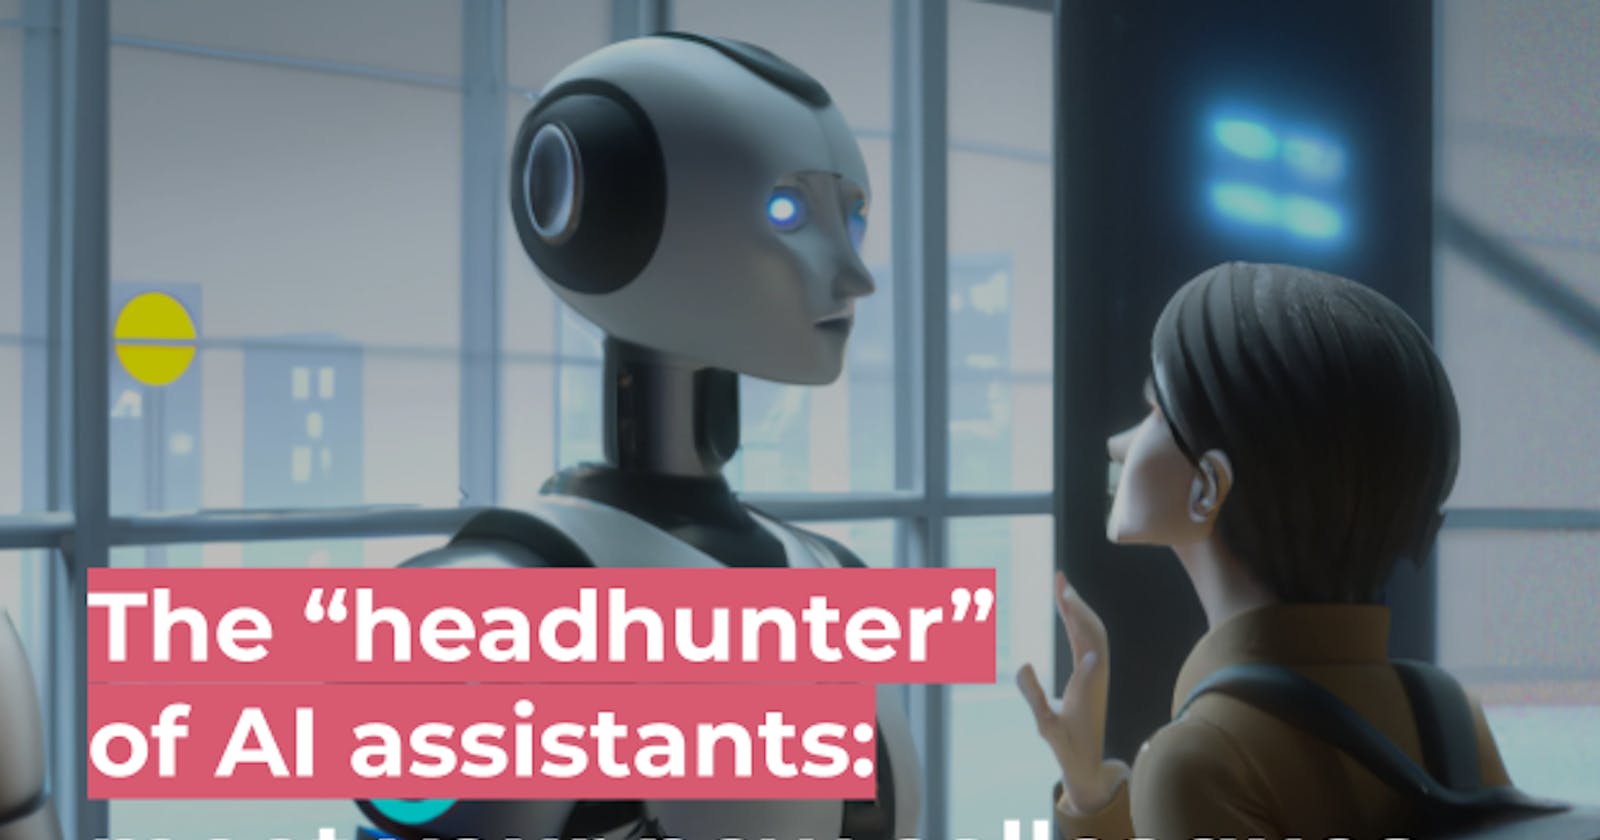 The “headhunter” of AI assistants: get ready to meet your new colleagues